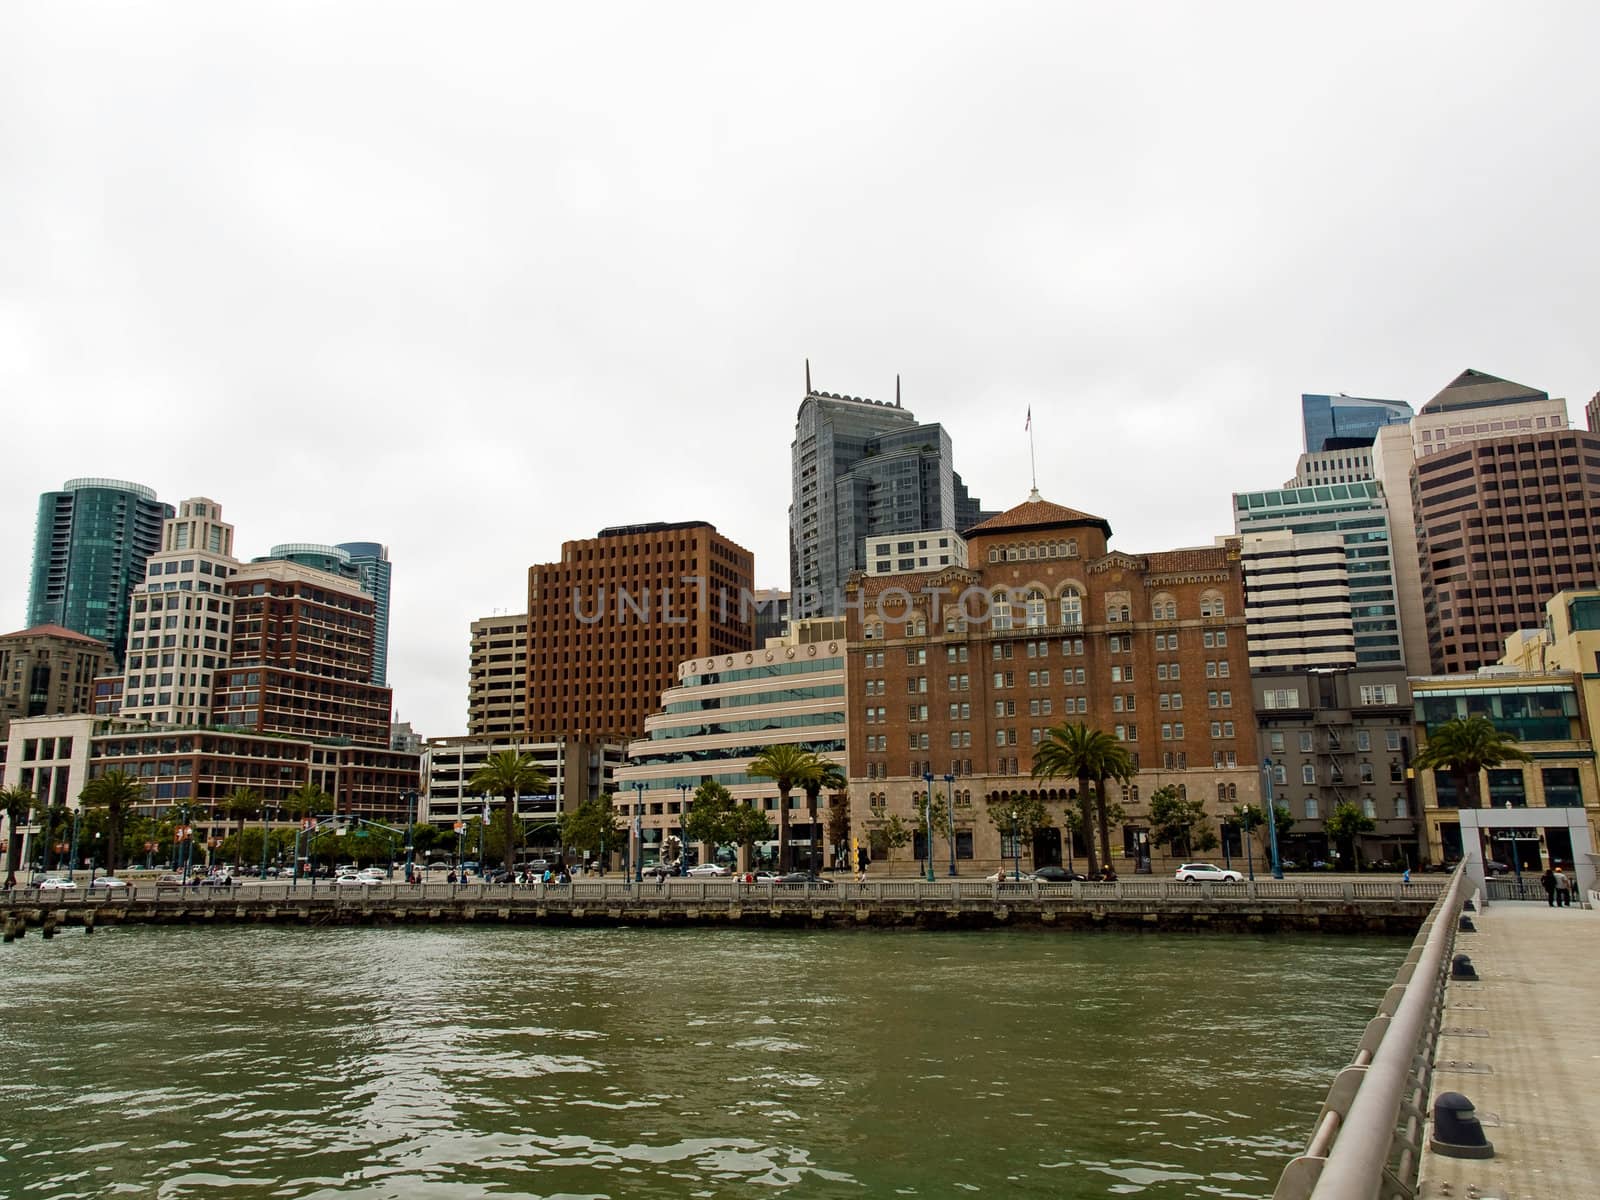 San Francisco as Seen from a Pier on a Cloudy Day